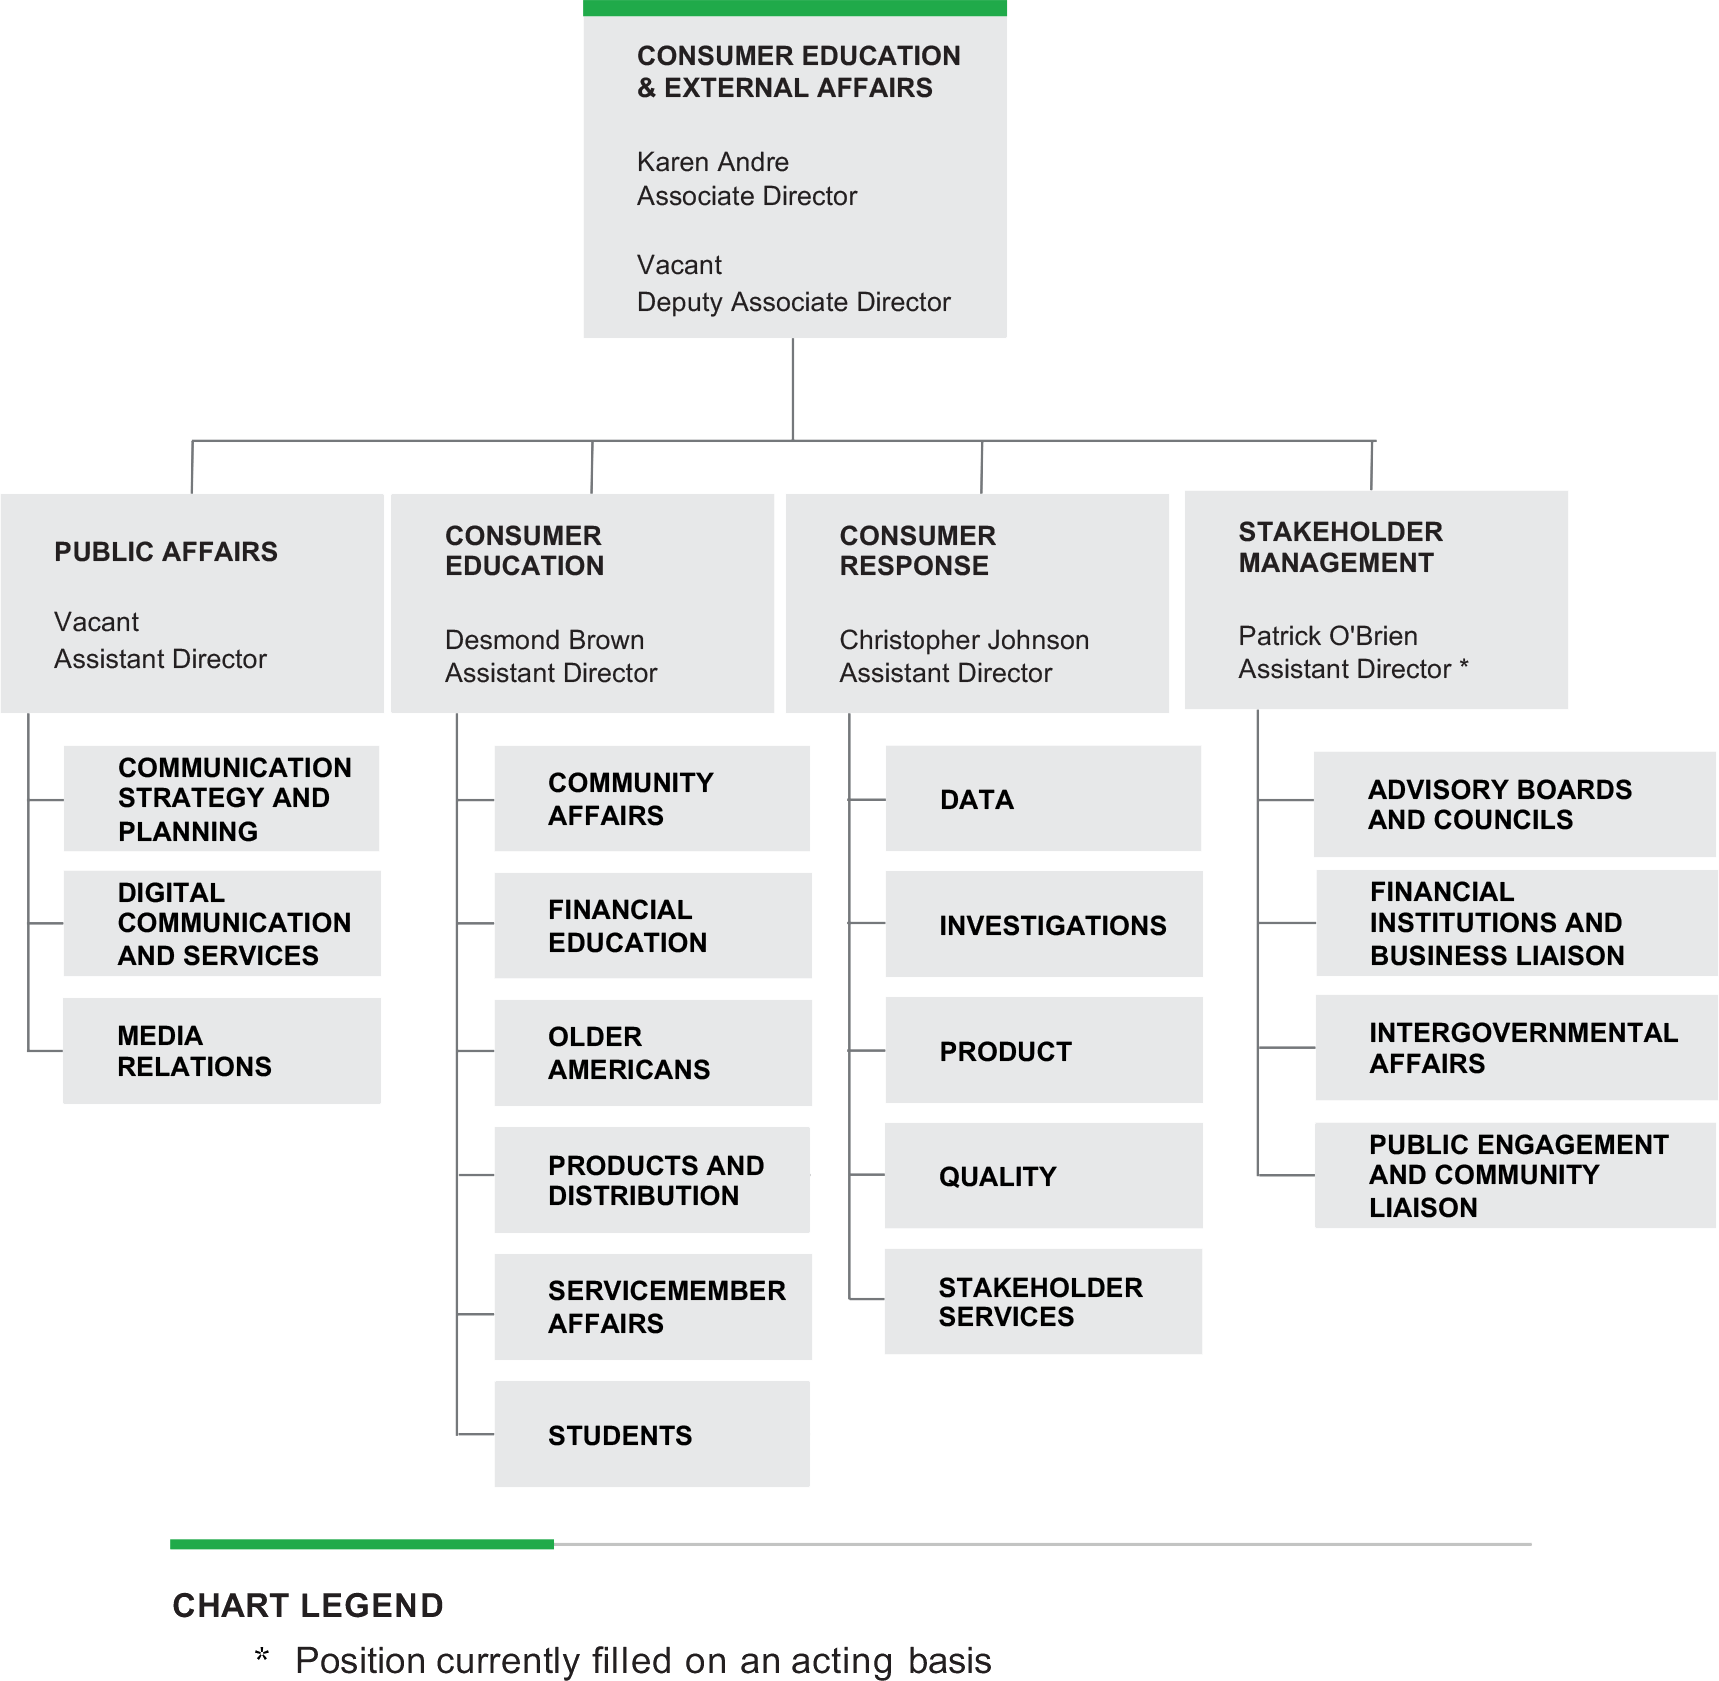 Organizational chart of the Consumer Education and External Affairs division